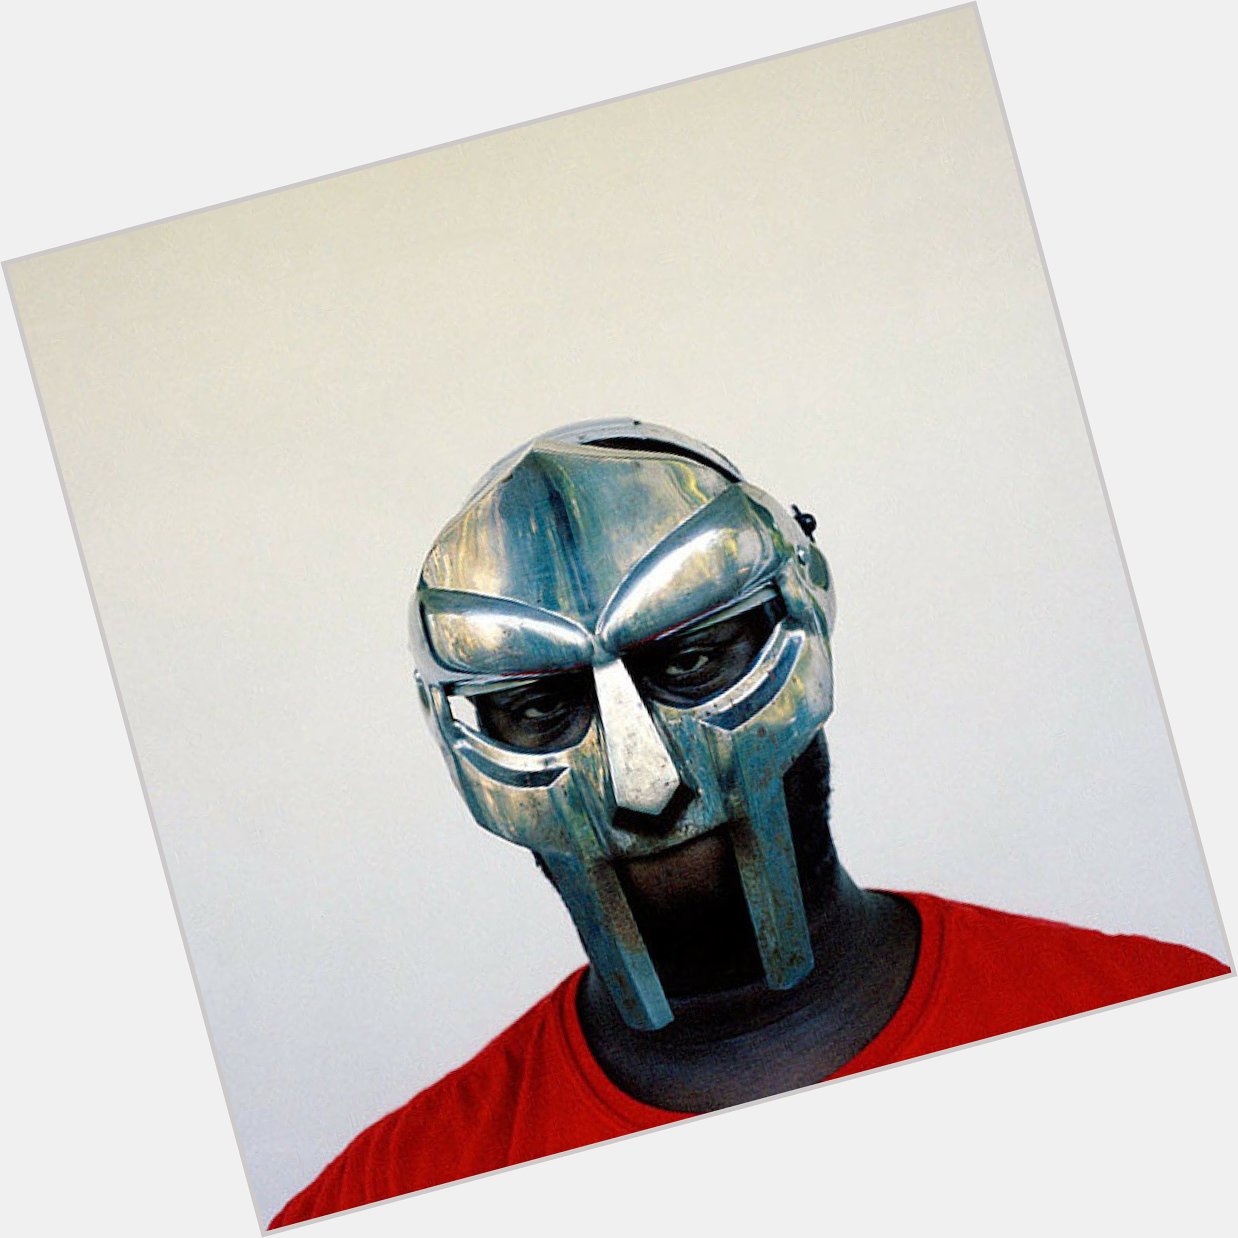 MF Doom would ve been 50 years old today.

Happy Heavenly Birthday & Rest In Peace   